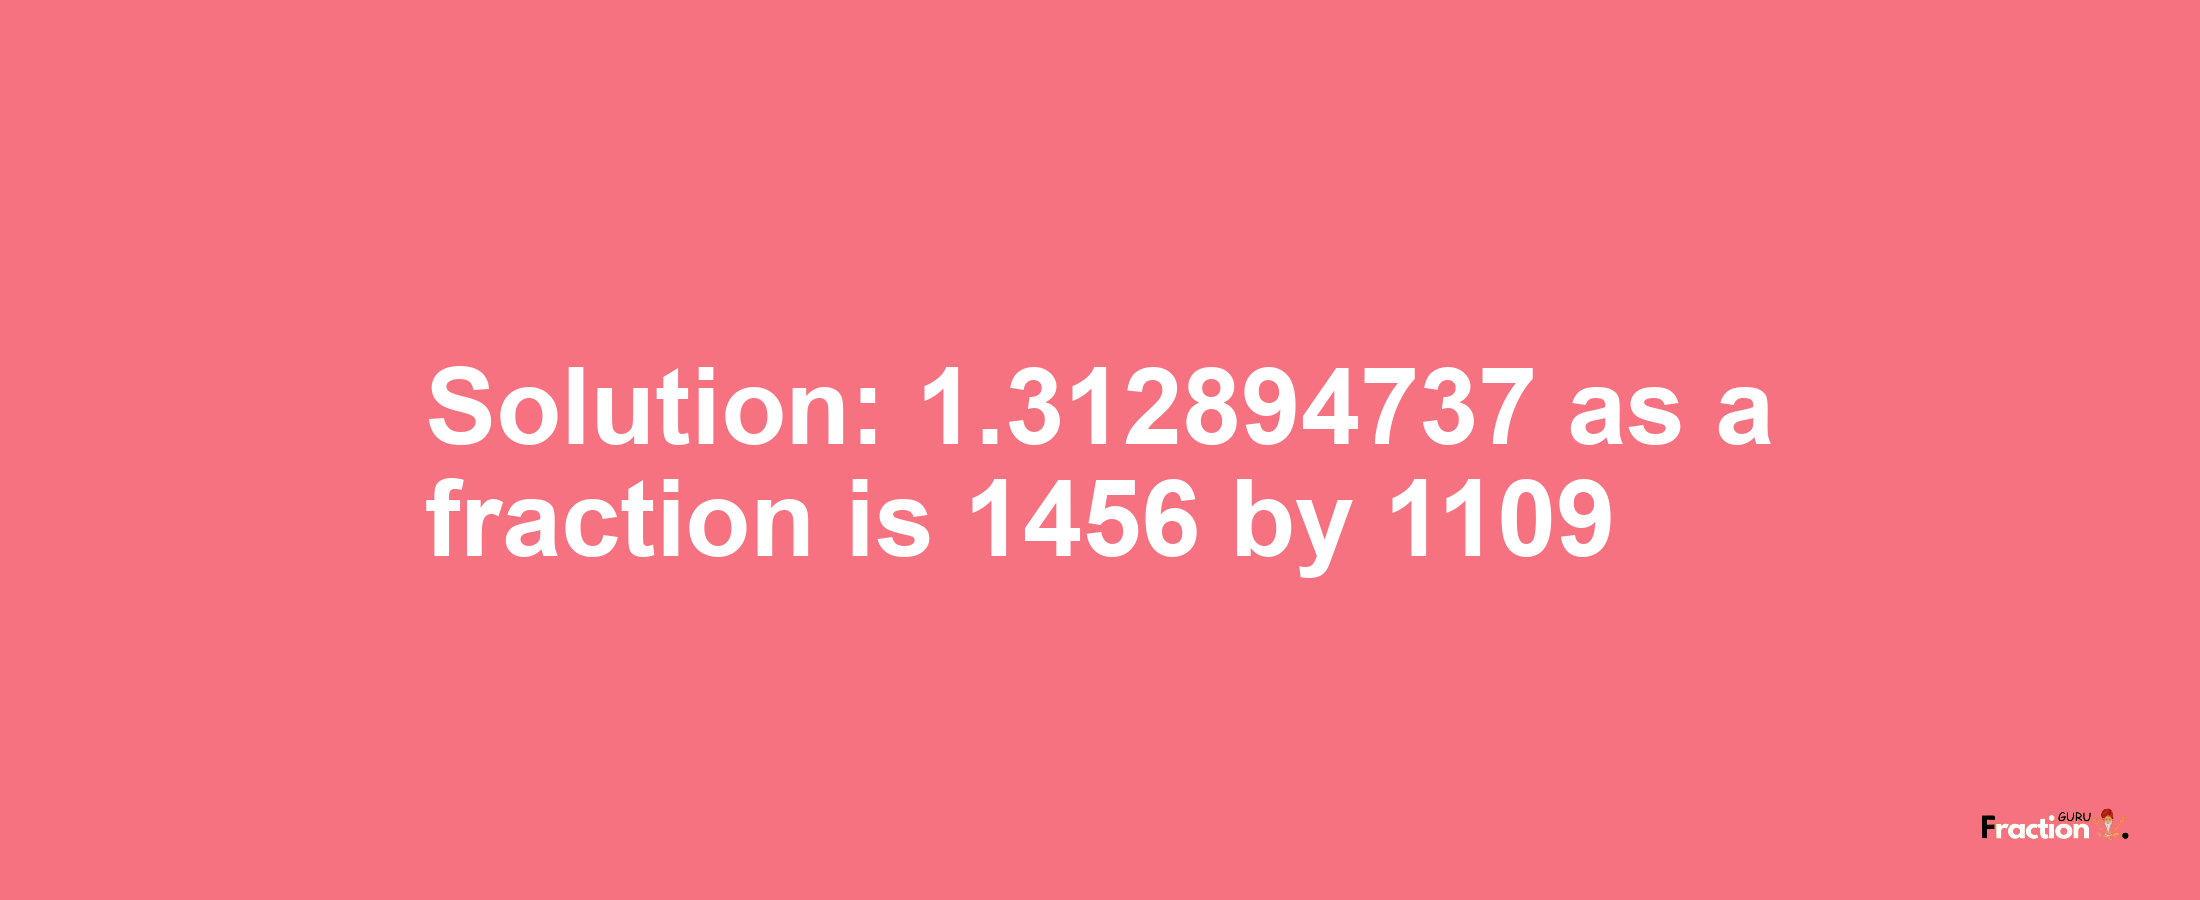 Solution:1.312894737 as a fraction is 1456/1109